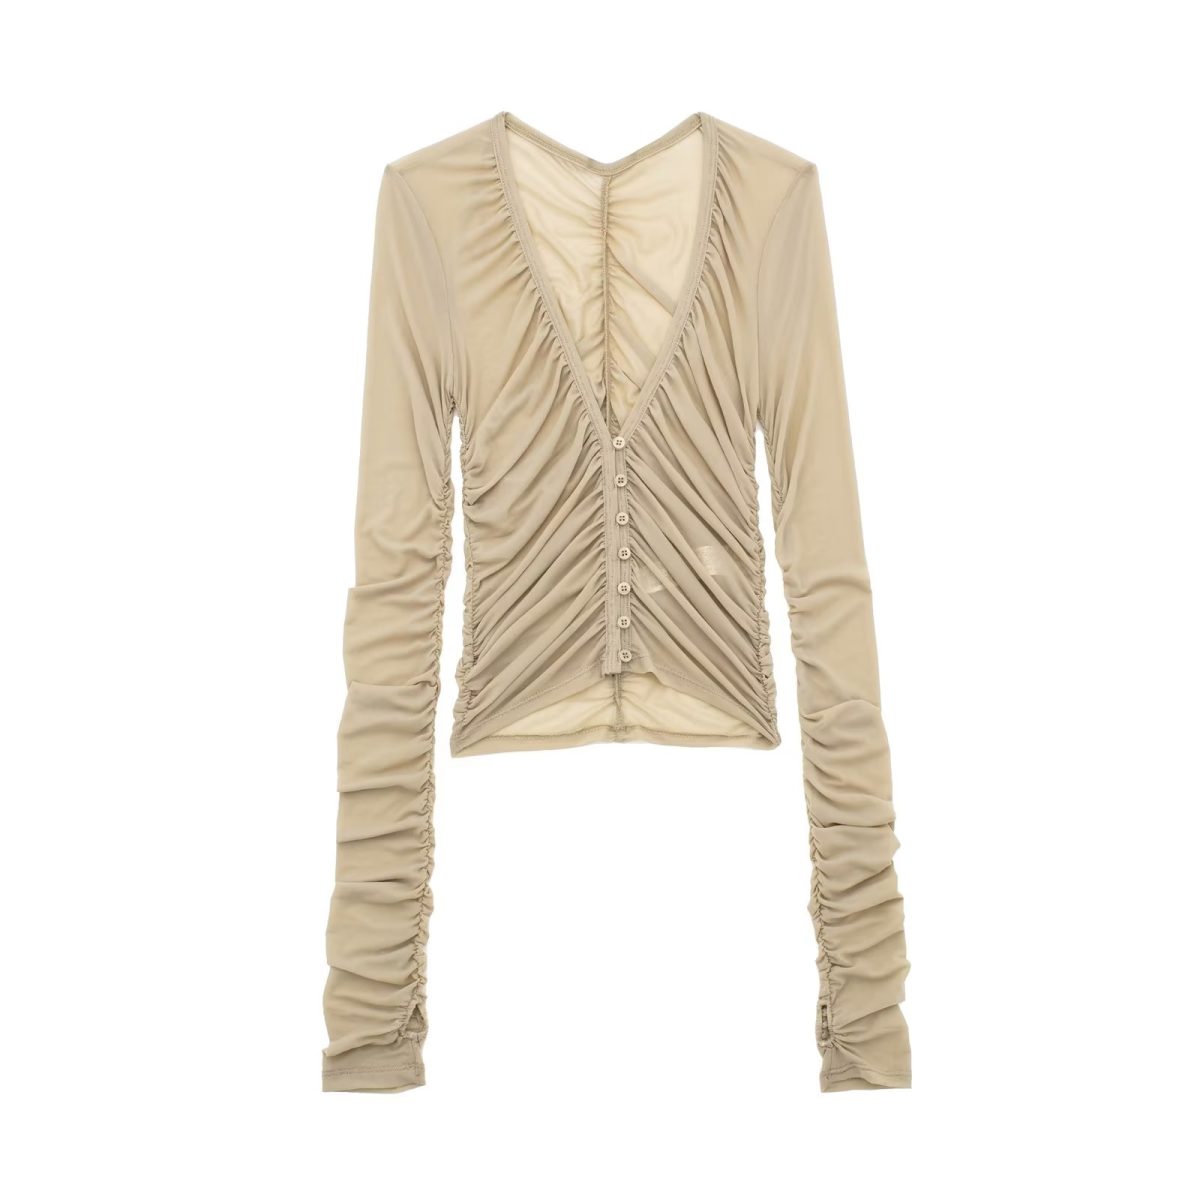 Spring Street Silk Net Pleated Top in Blouses & Shirts